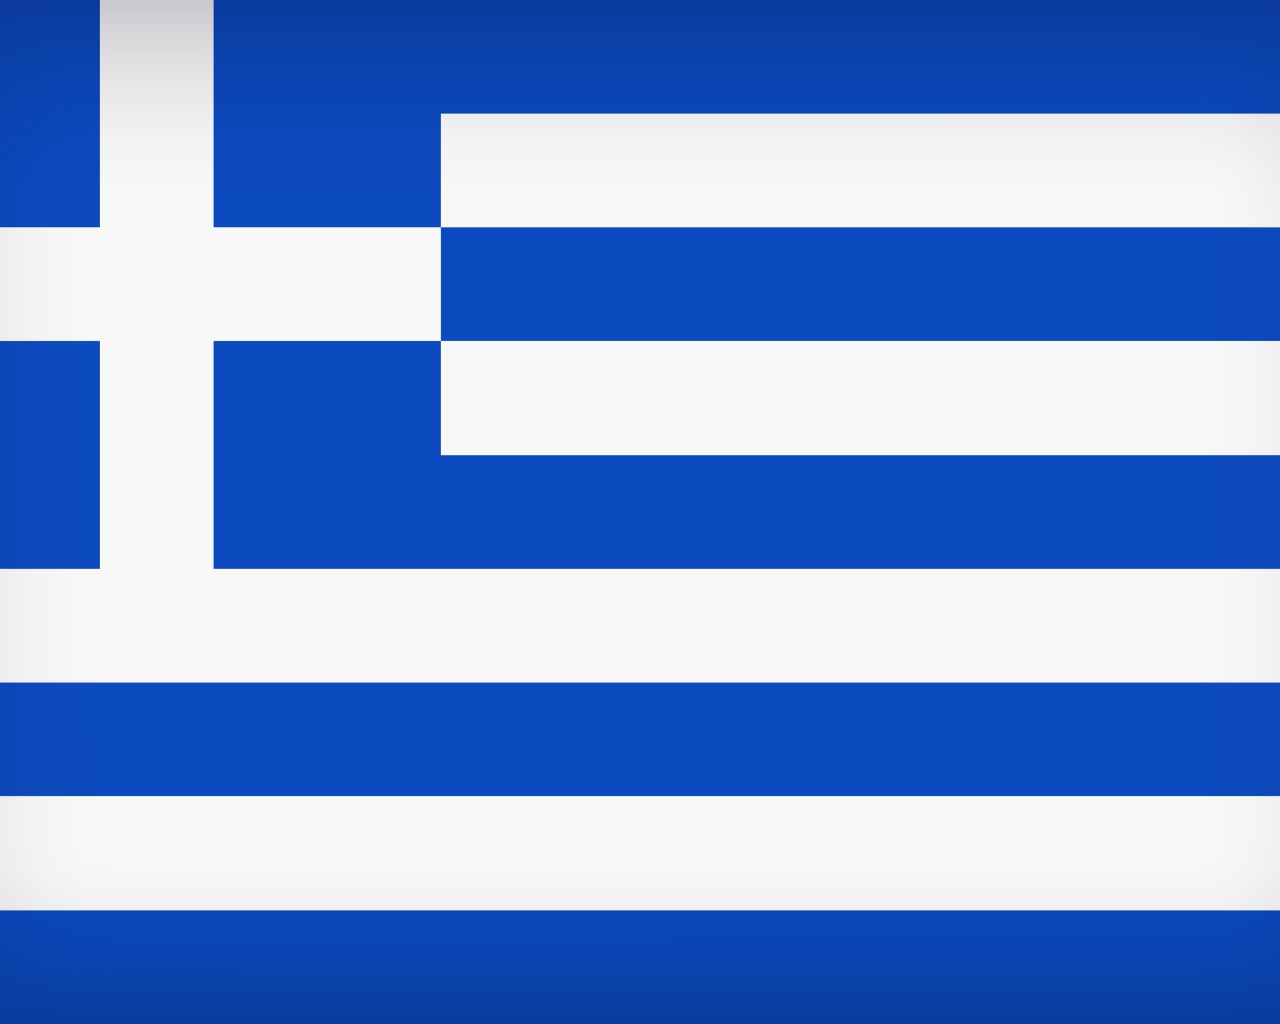 Blue and white flag of Greece